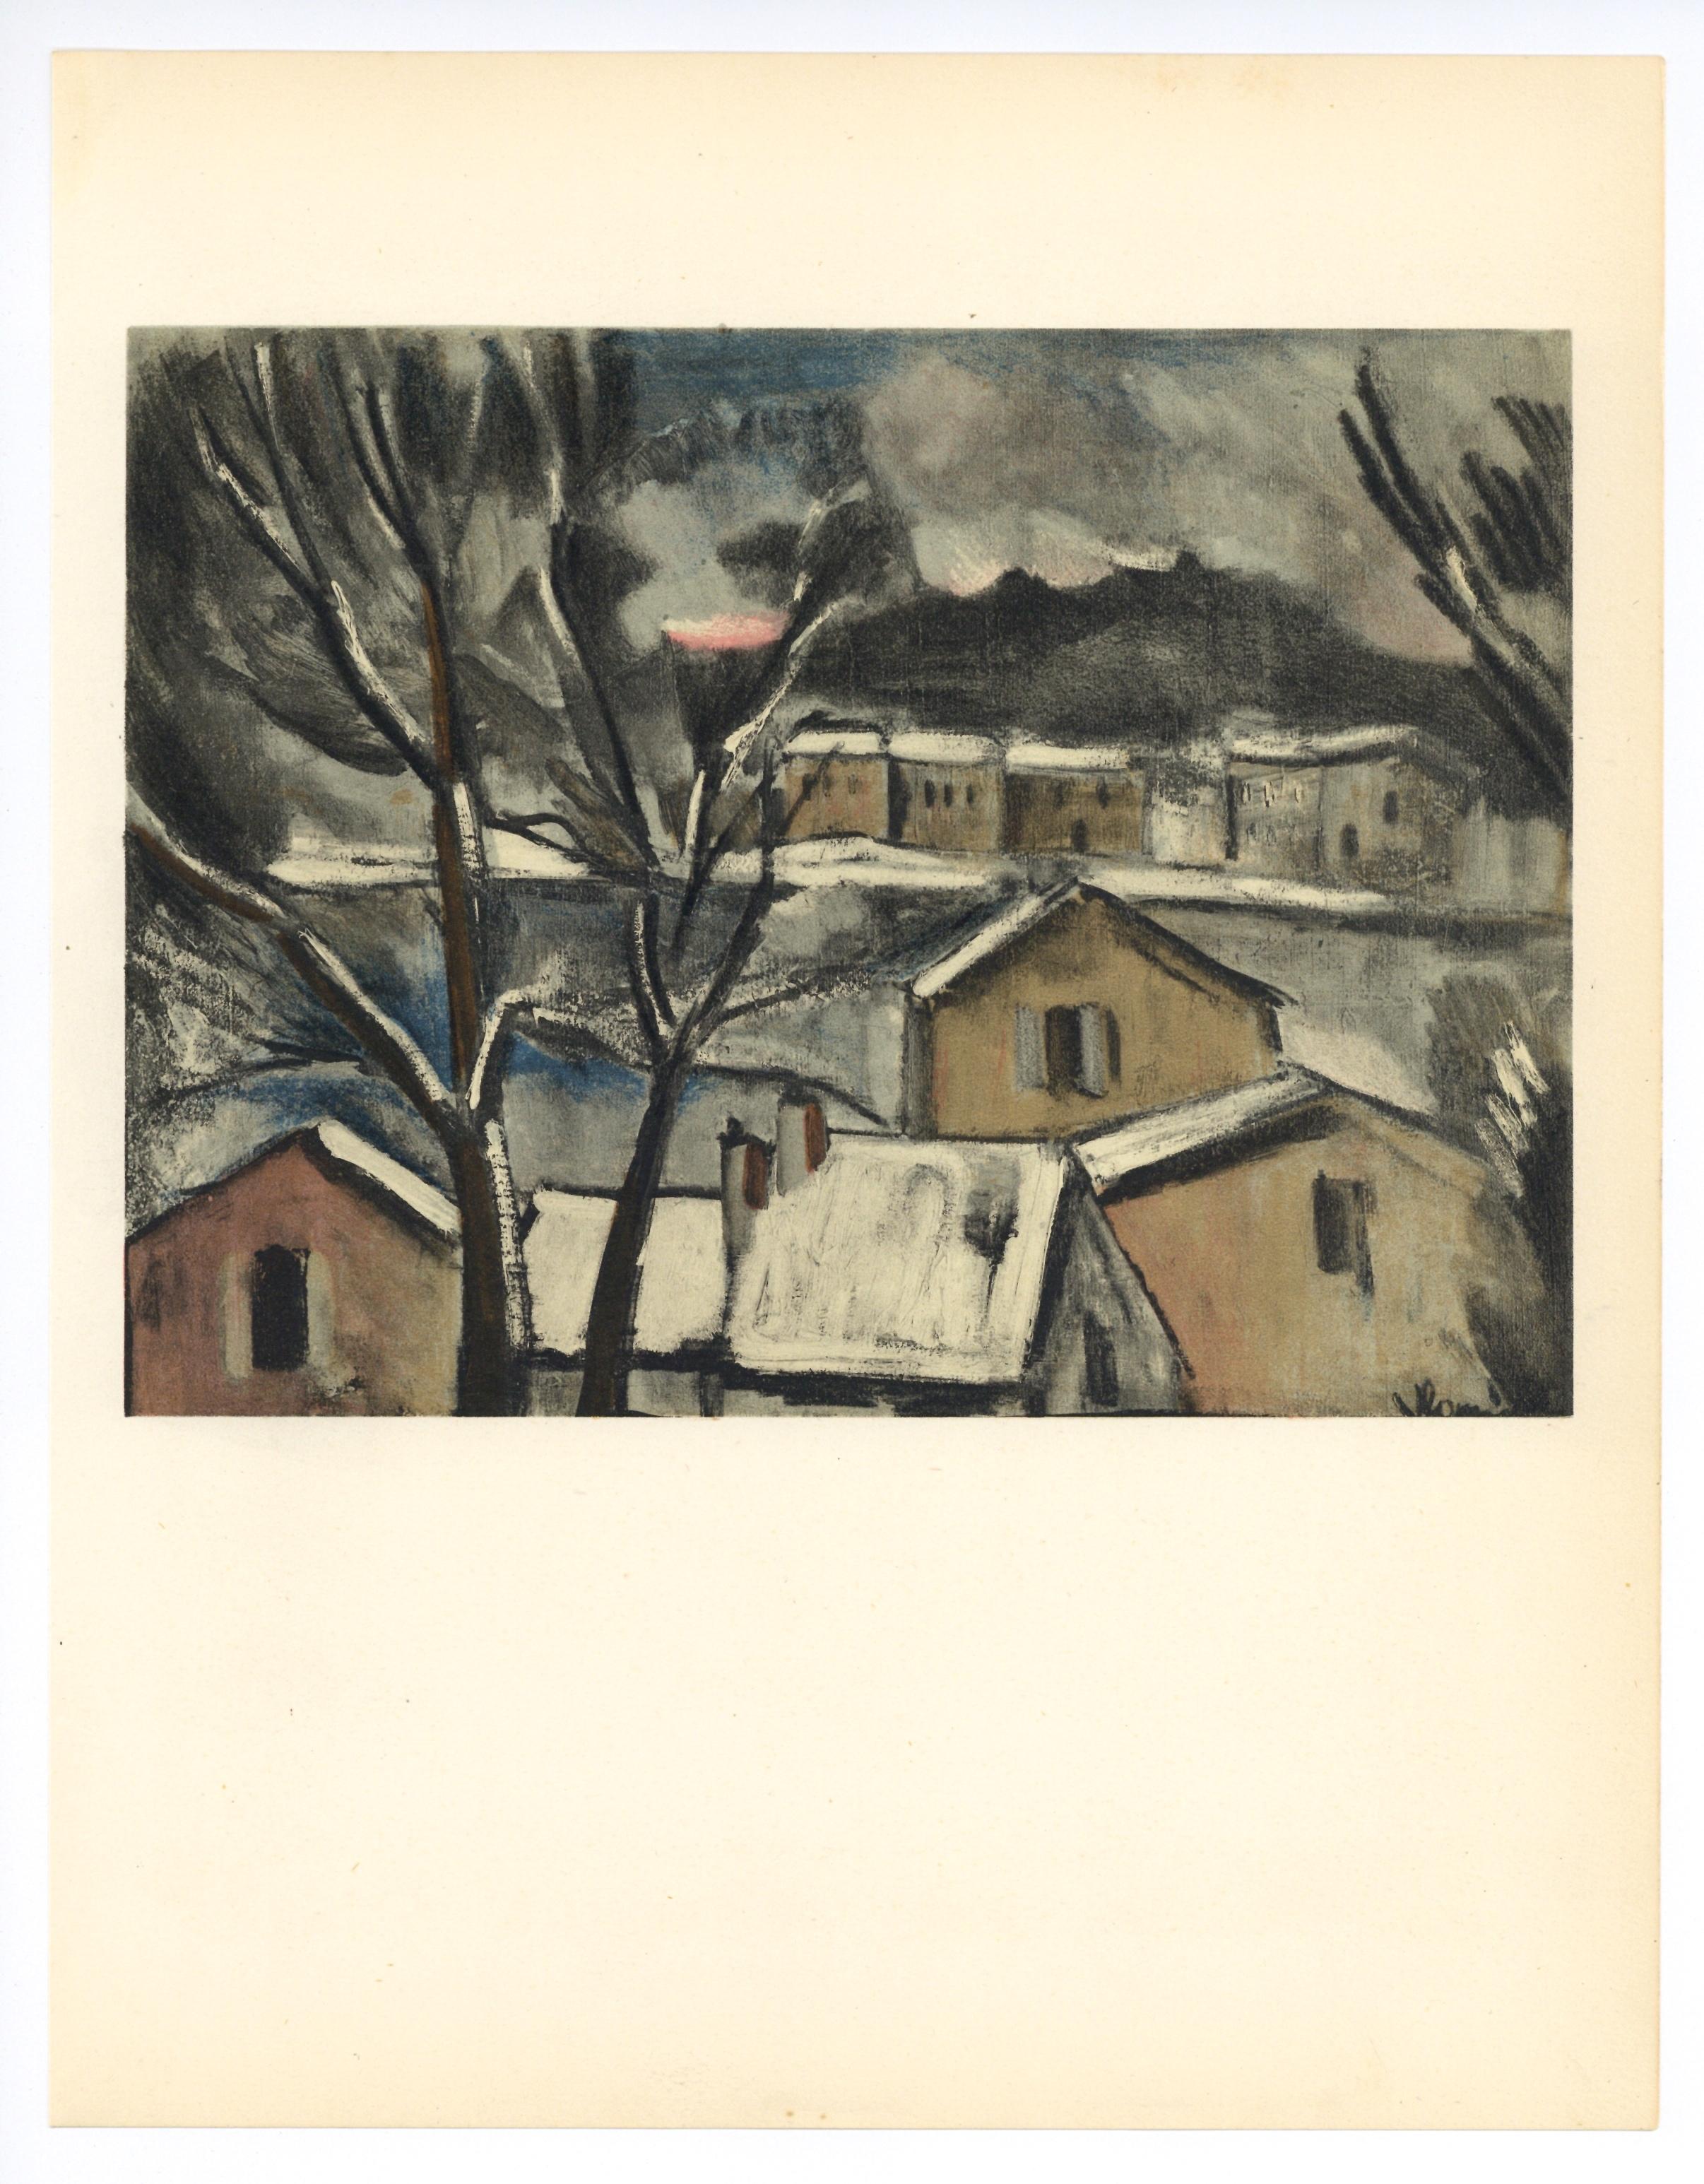 Medium: lithograph. This lithograph (after the Vlaminck painting) was printed in Paris in 1958 by the Mourlot atelier and published in an edition of 2000. The image size is 6 1/2 x 8 1/2 inches (163 x 217 mm). The full sheet measures 12 1/4 x 9 1/2